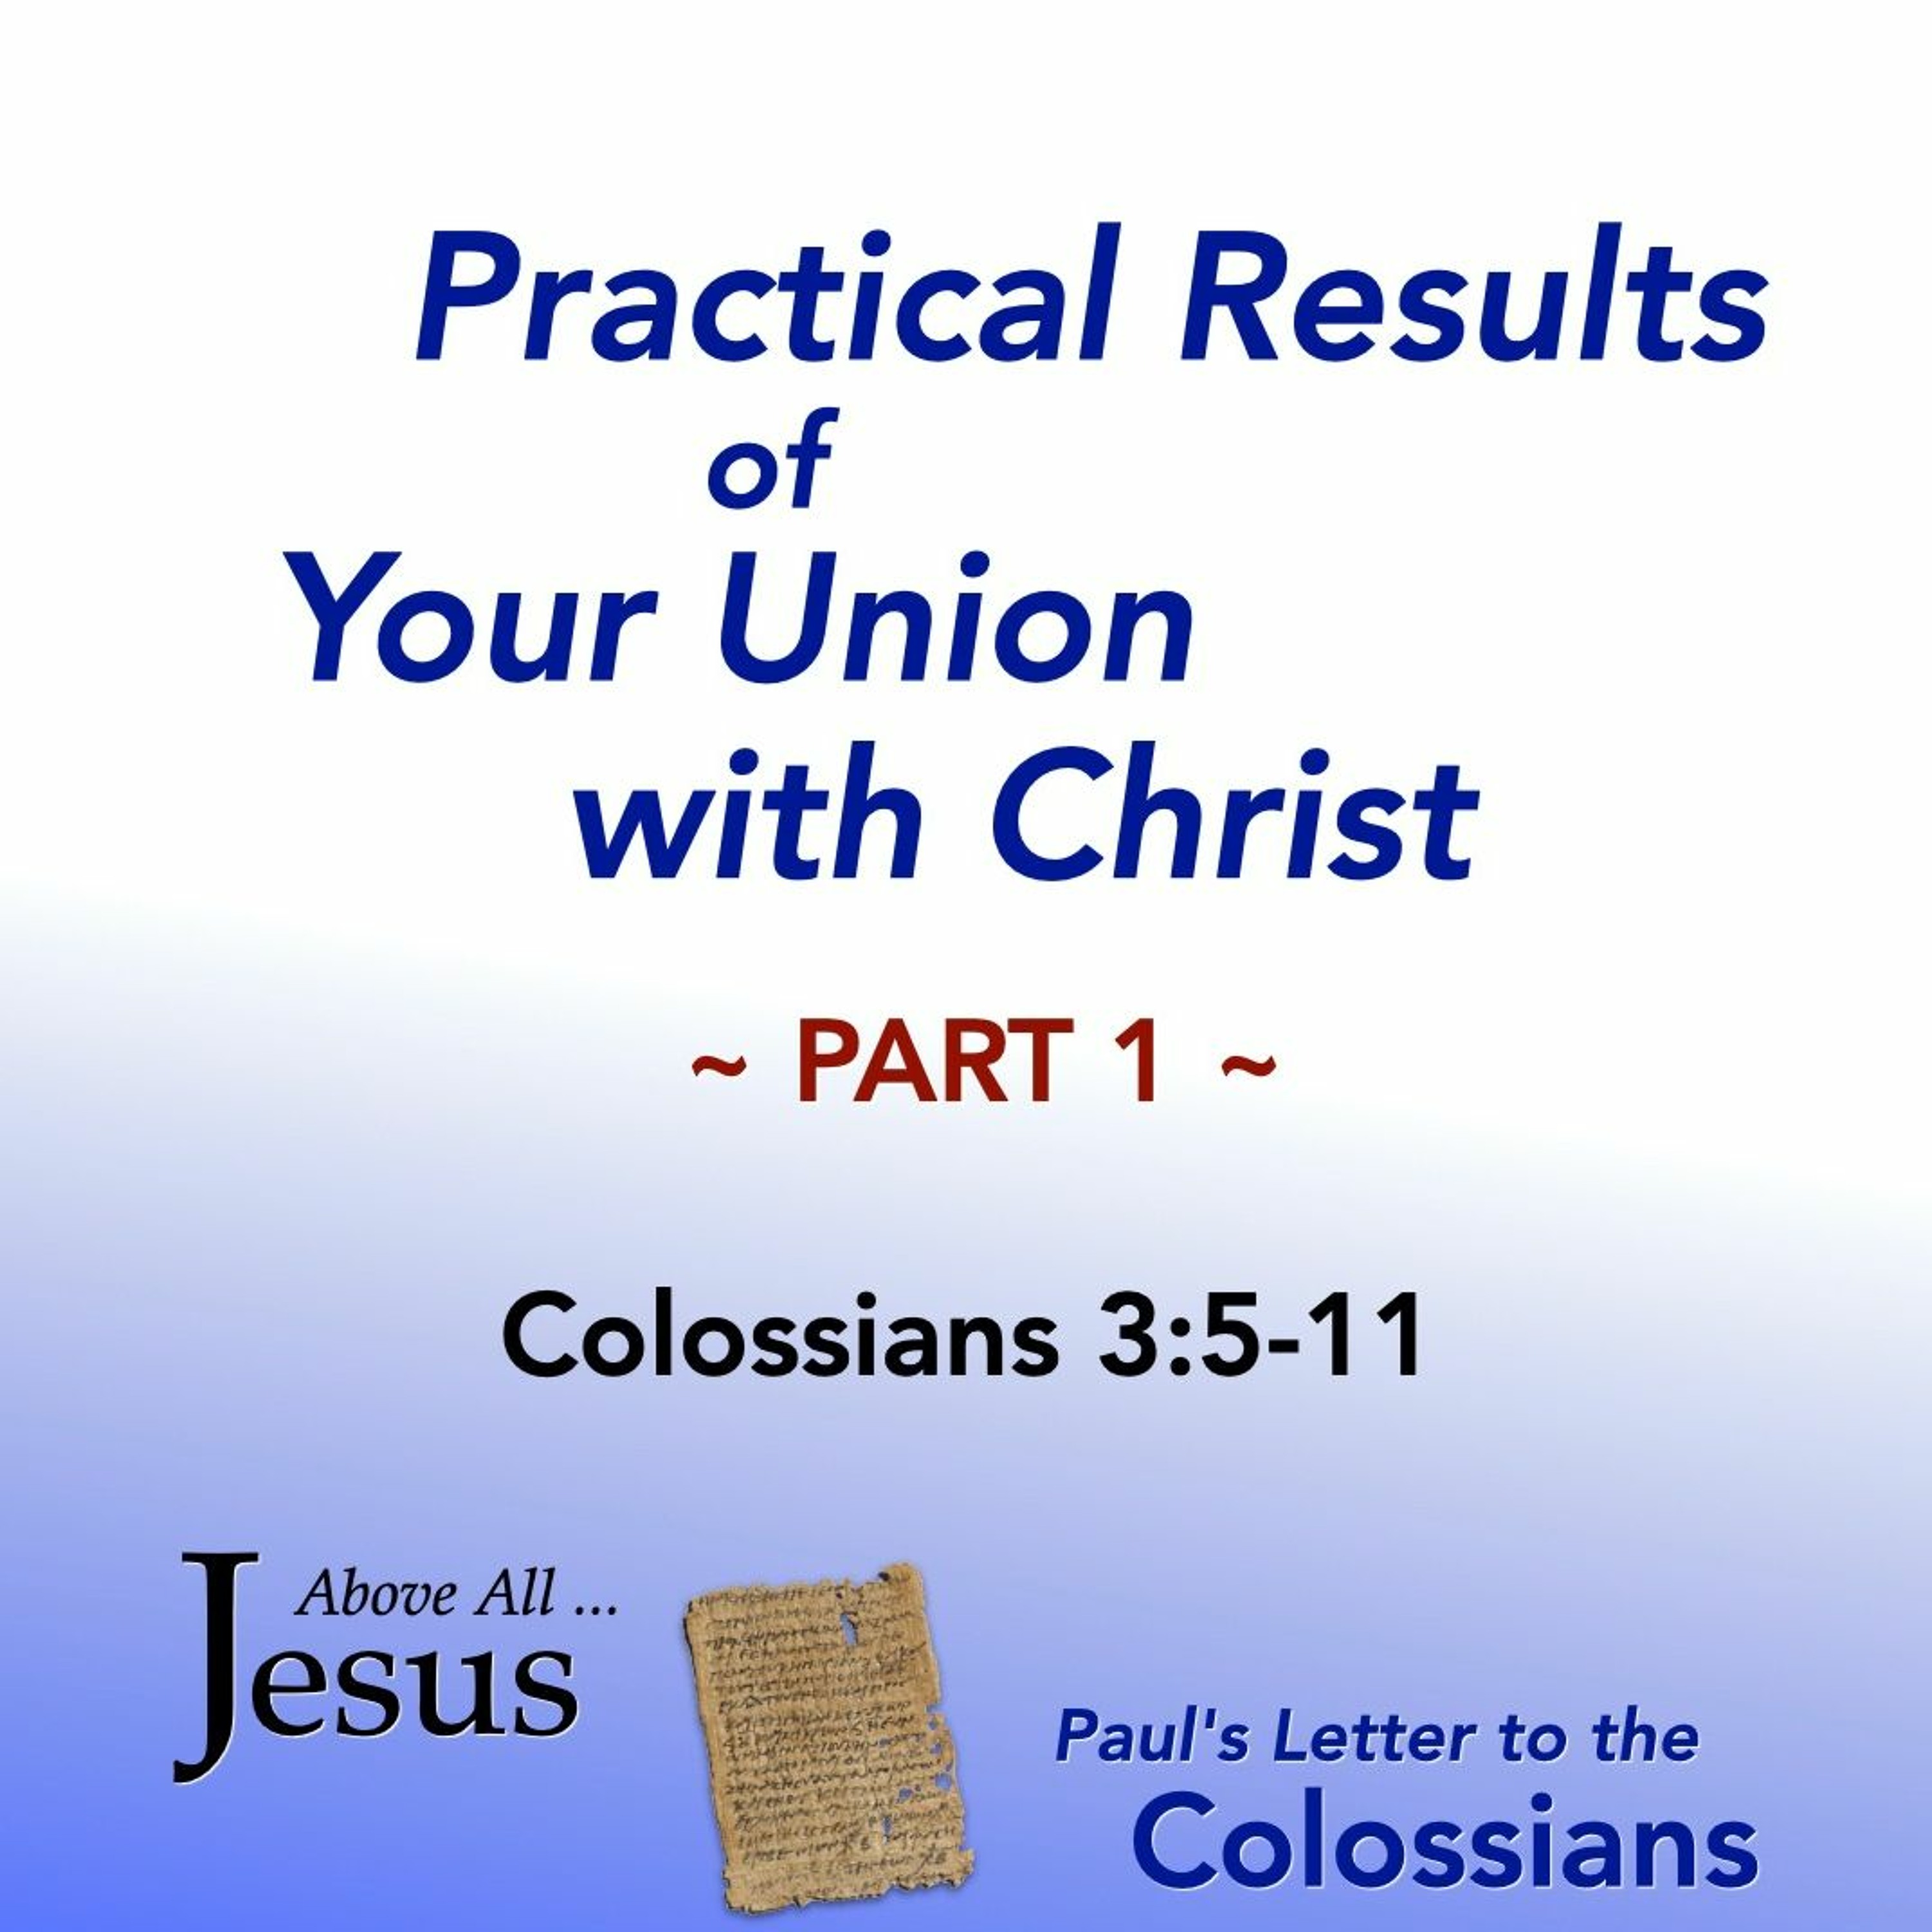 11-13-22 Practical Results of Your Union With Christ